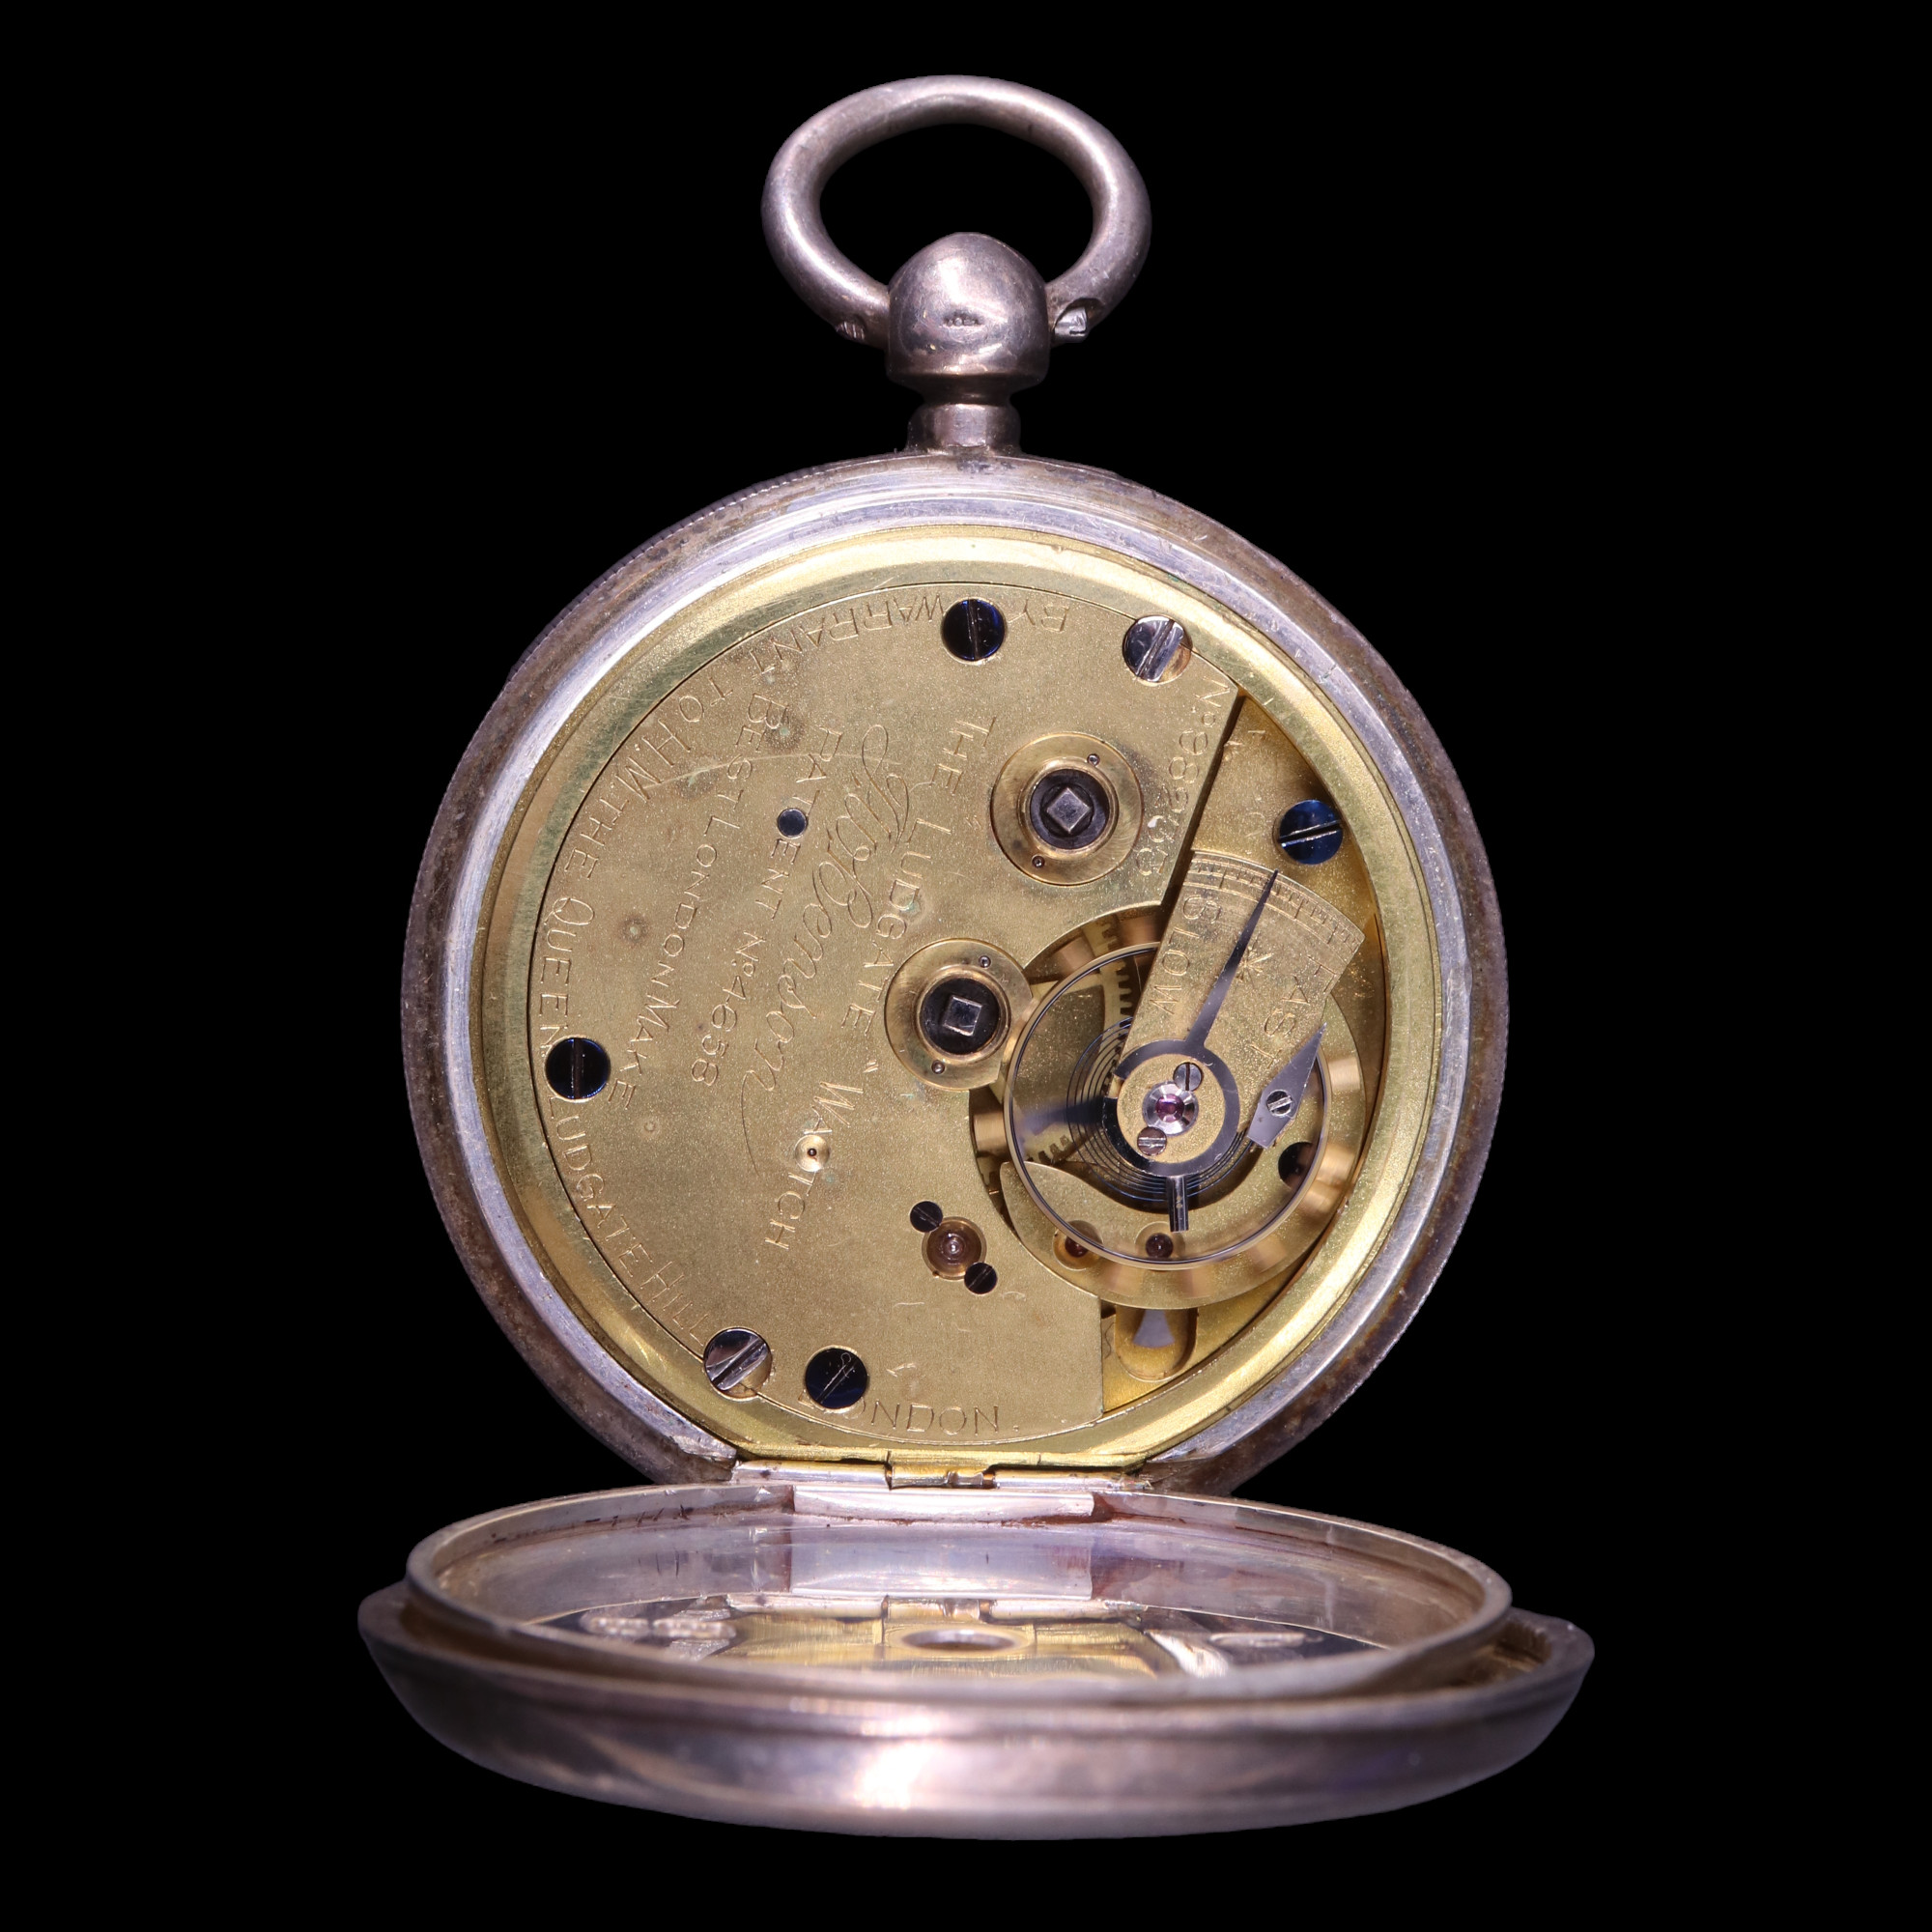 A Victorian silver key-wound "Ludgate" watch, Patent No 4658, by J W Benson, "by warrant to H M - Image 3 of 5